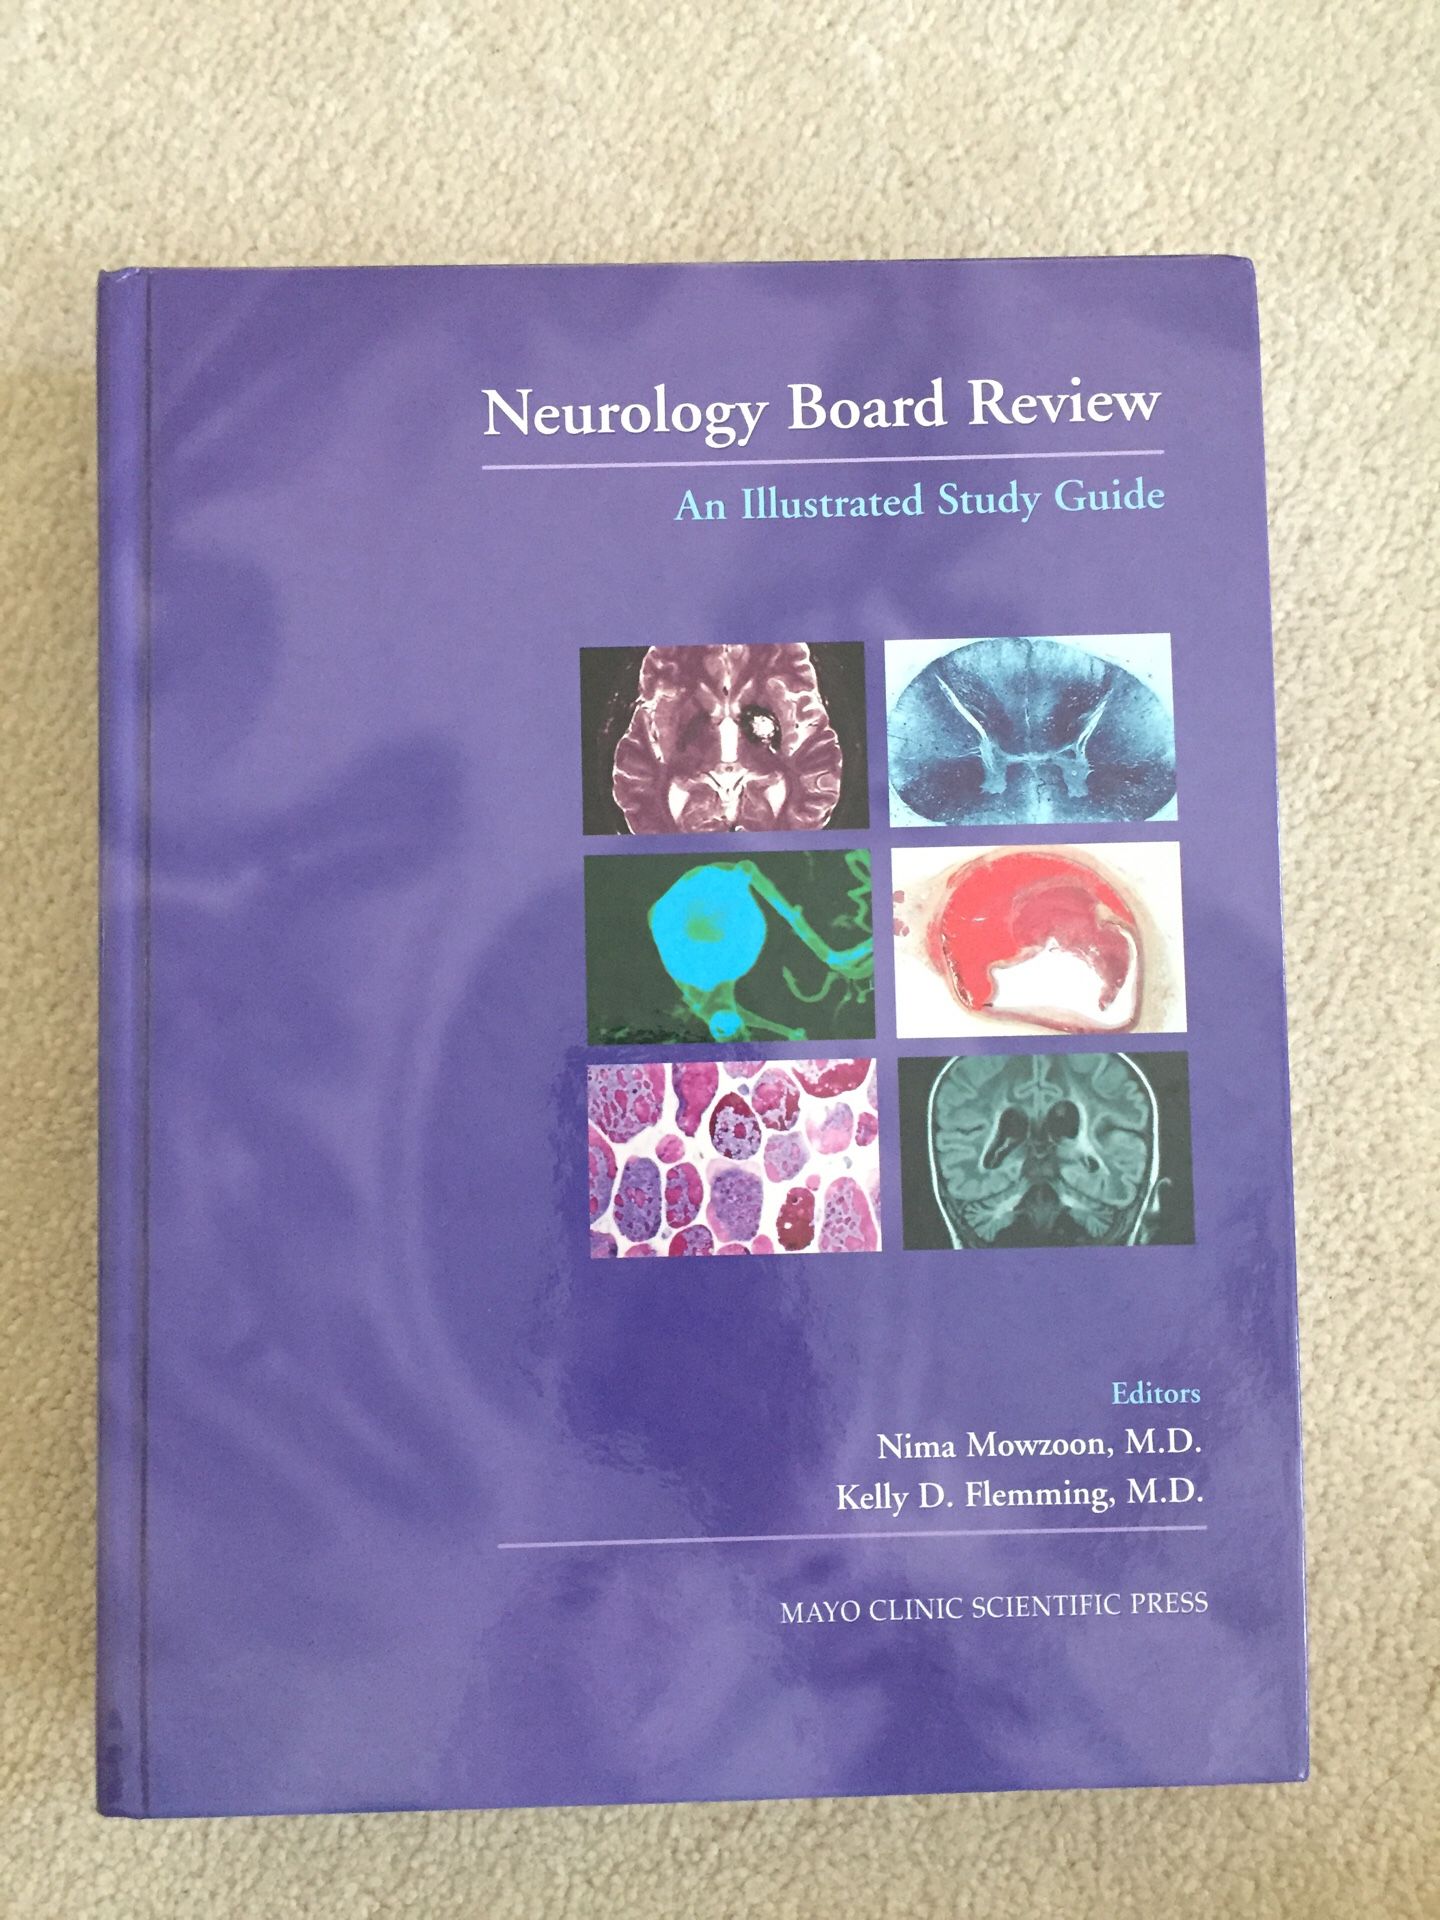 Neurology board review. Mint condition. Amazing book to review for board exam.